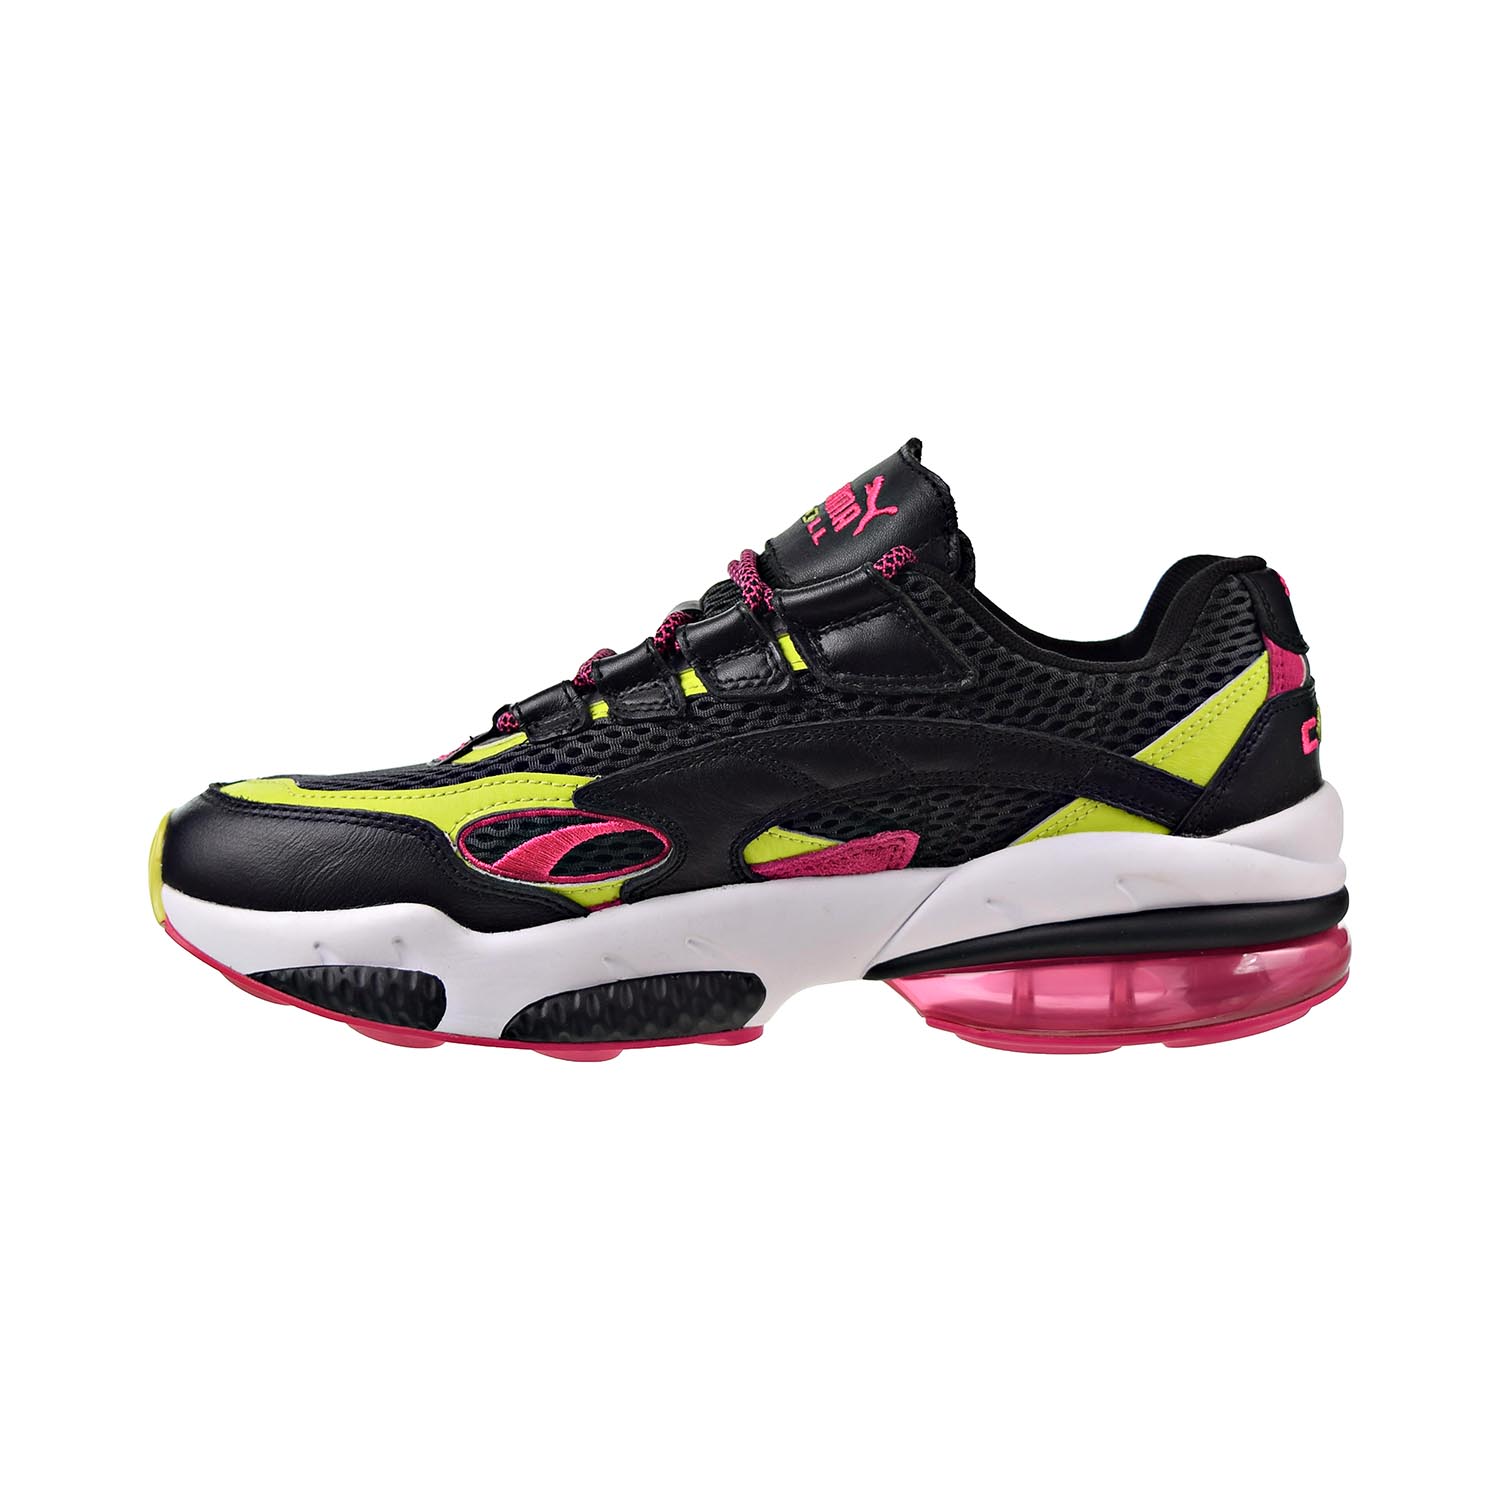 Puma Cell Venom 370417-01 Men Black/Pink/Lime Punch Athletic Running Shoes C1385 (11) - image 4 of 6